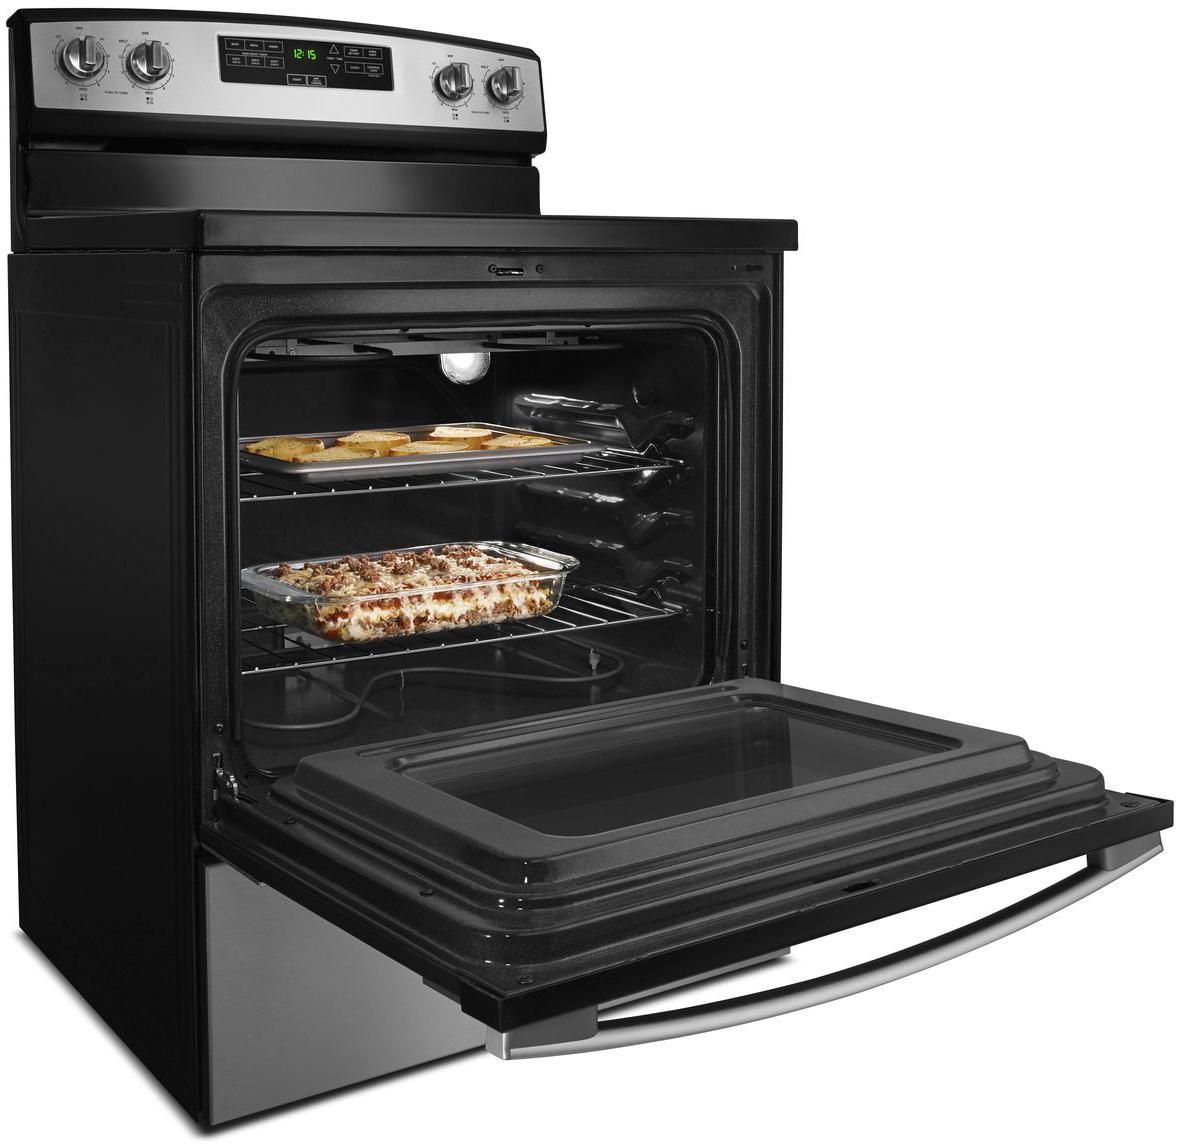 20-inch Amana® Electric Range Oven with Versatile Cooktop